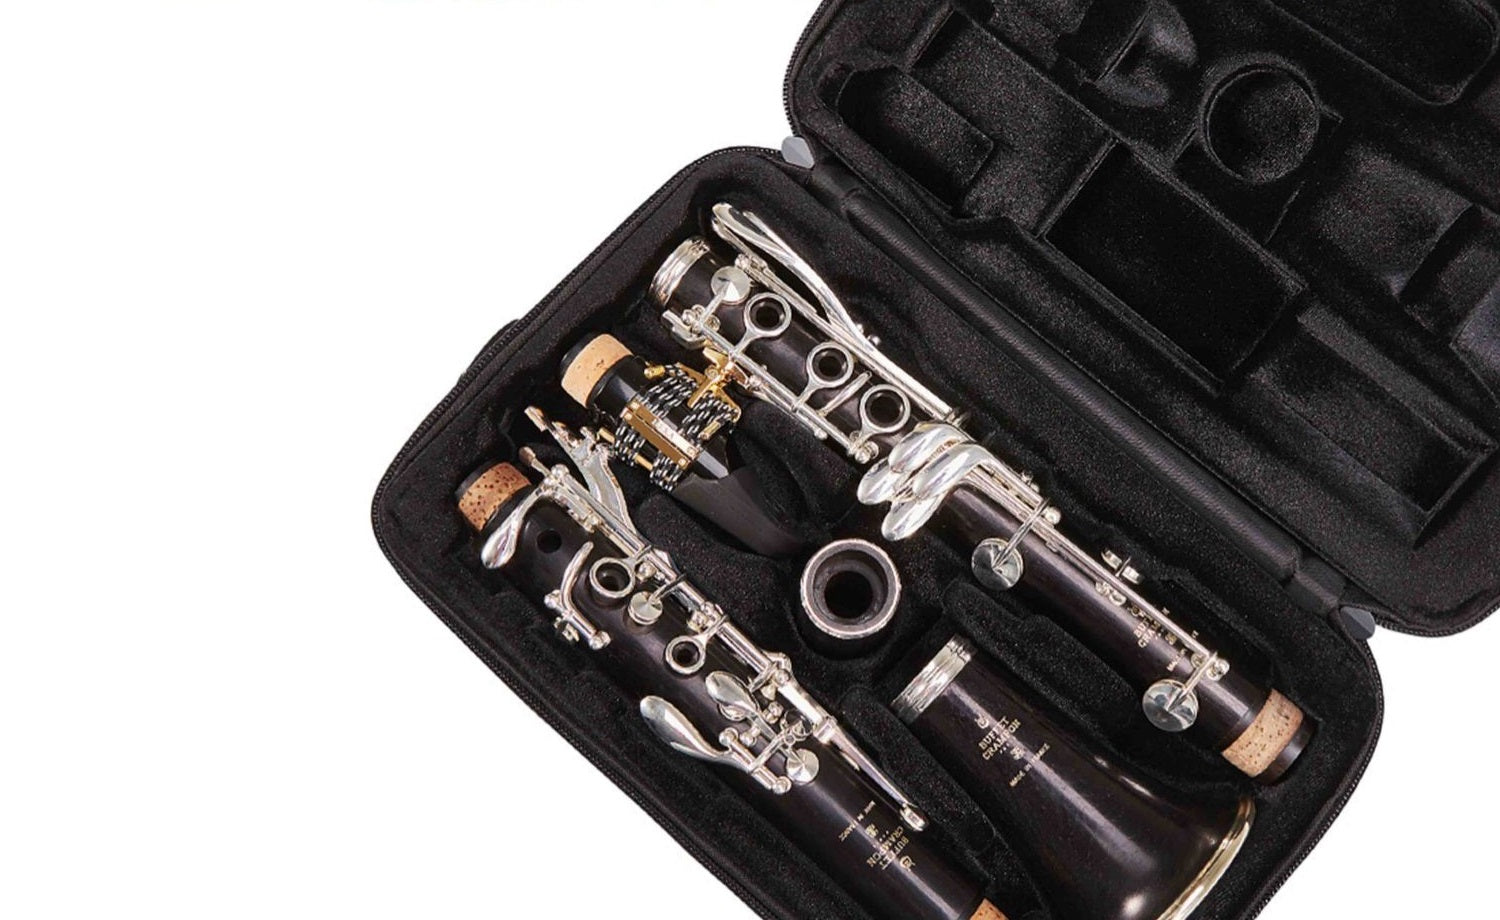 Buffet Crampon Compact Clarinet Case with accessories bag (assorted colors)